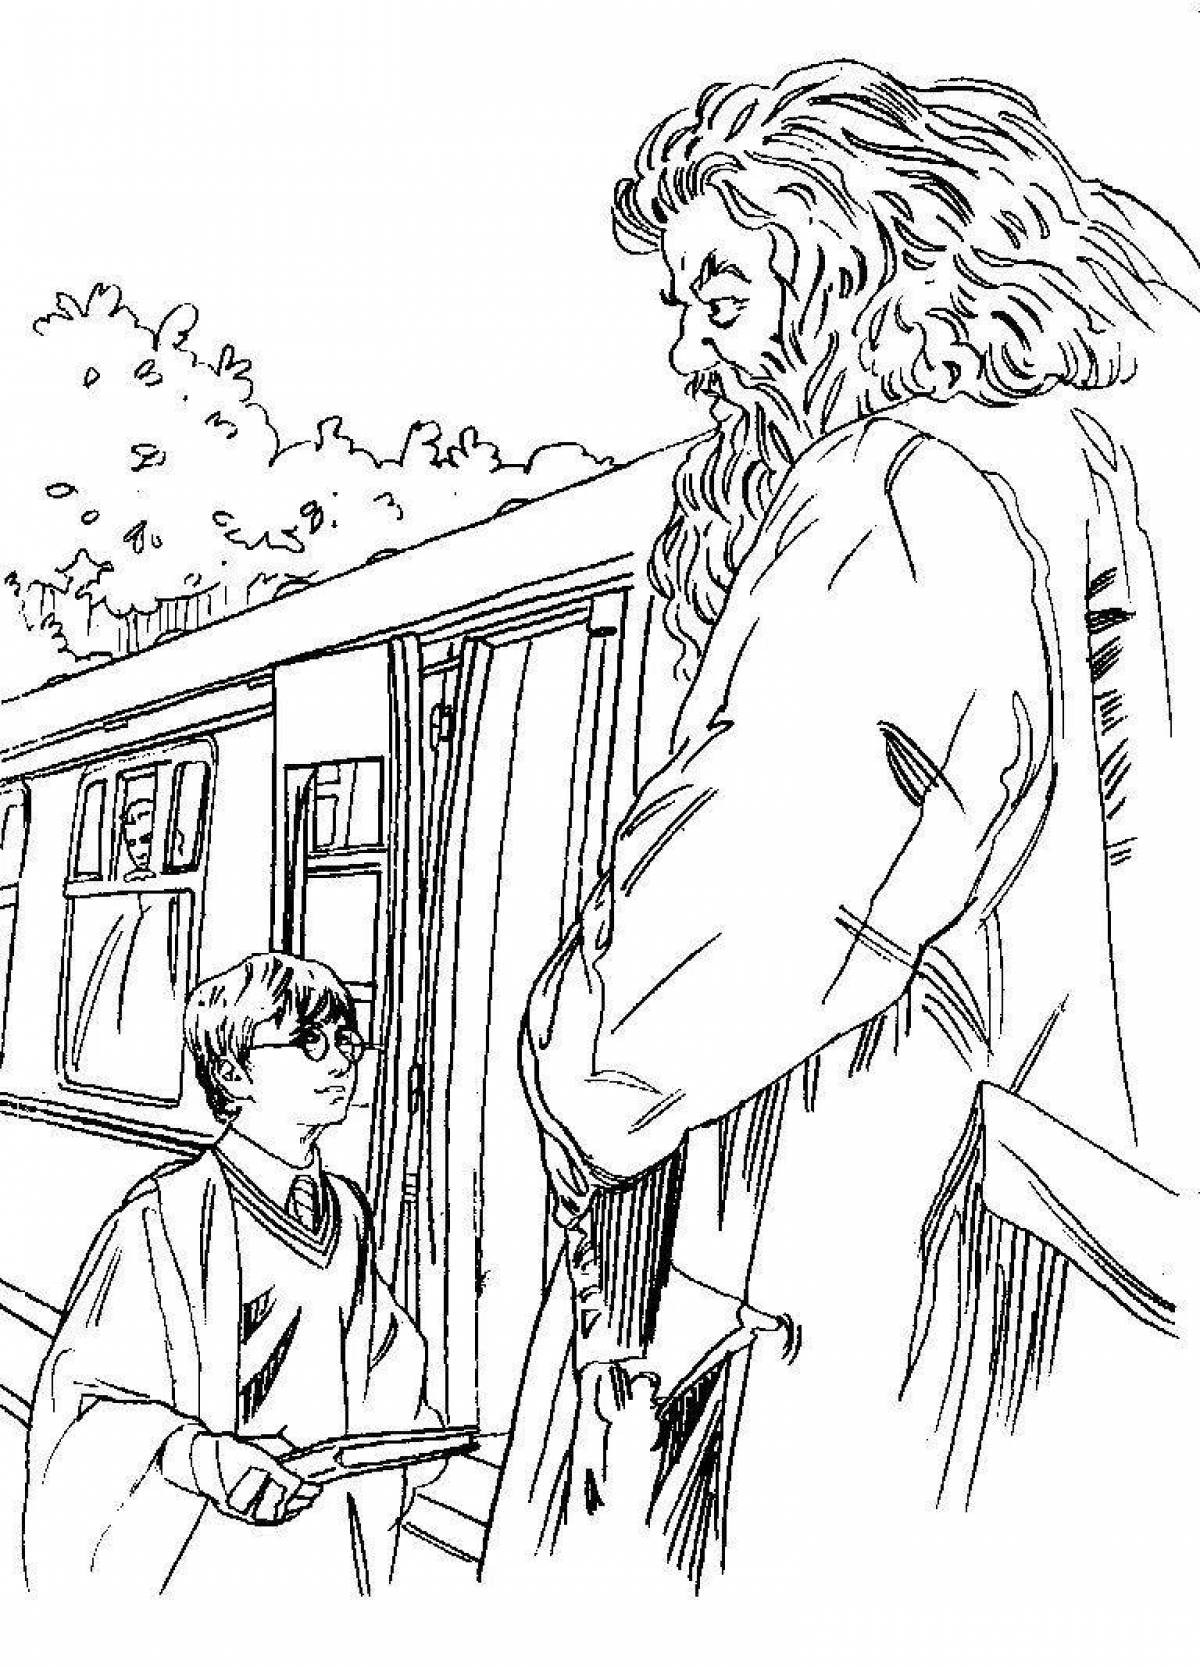 Charming harry potter and the philosopher's stone coloring book